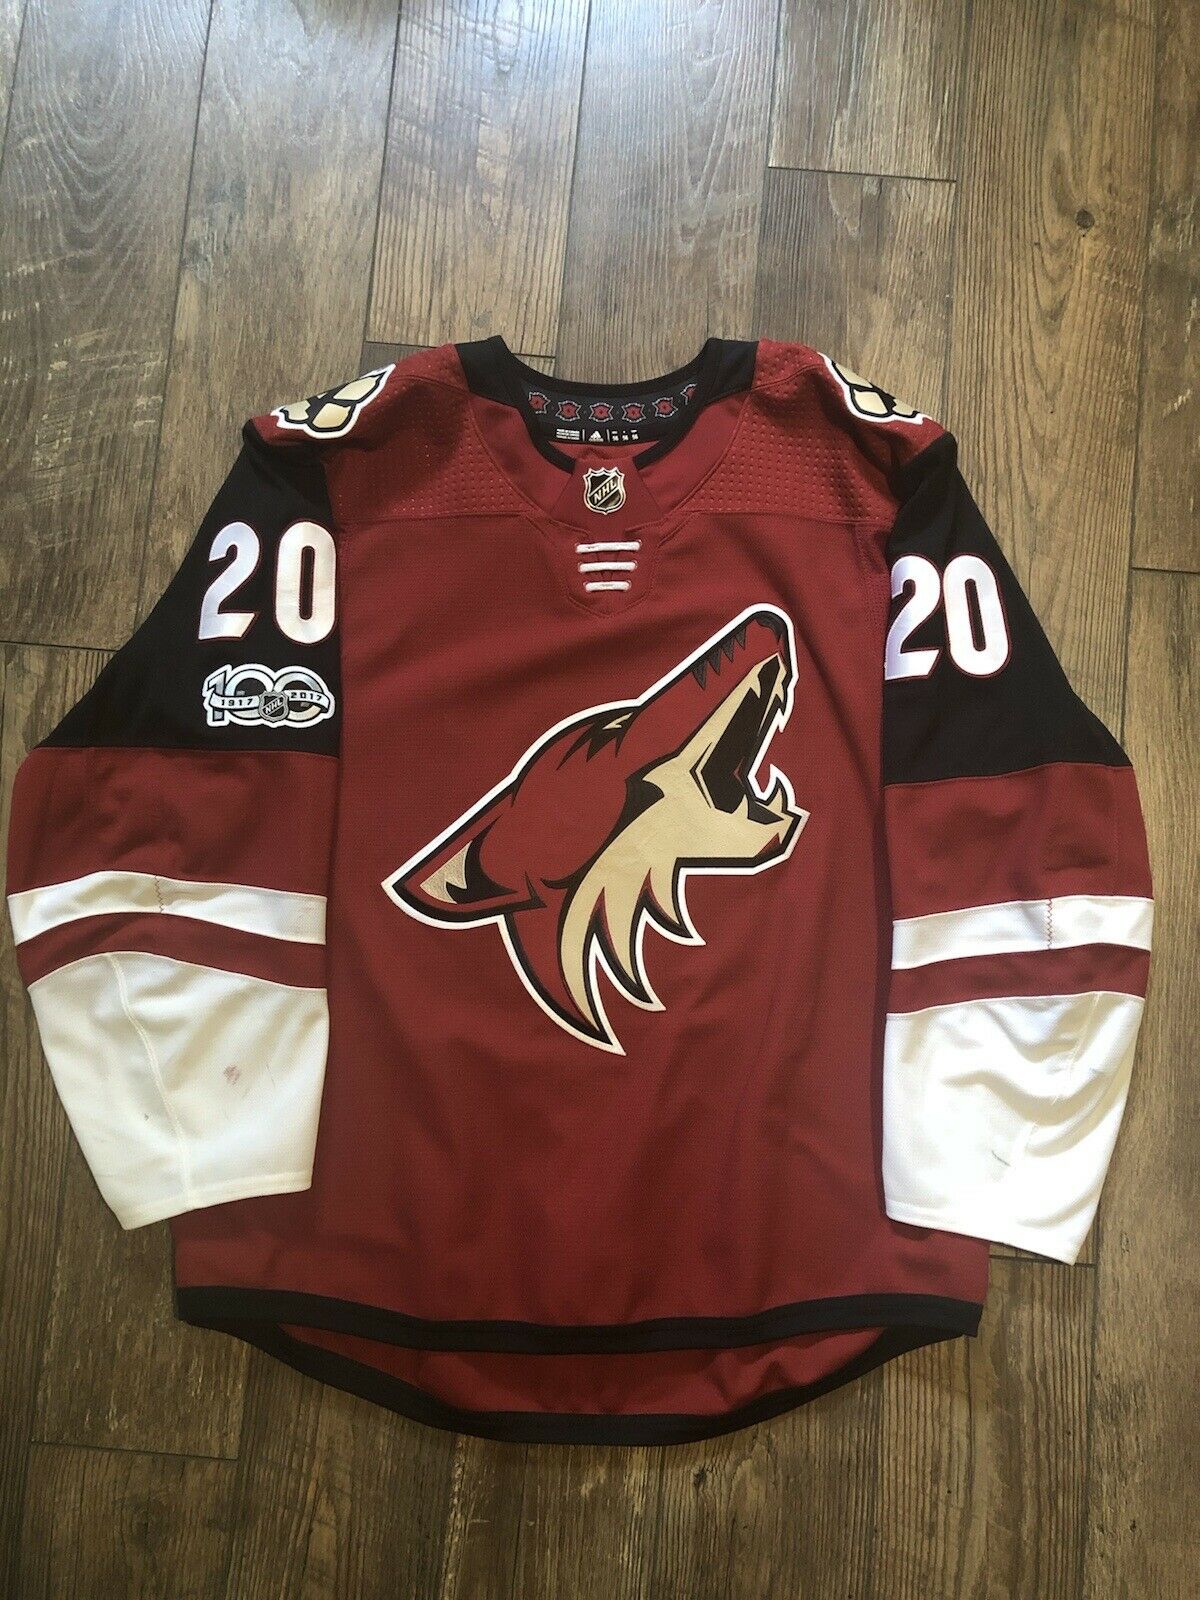 2017-18 Dylan Strome Arizona Coyotes Game Used Worn Jersey 1st Nhl Goal